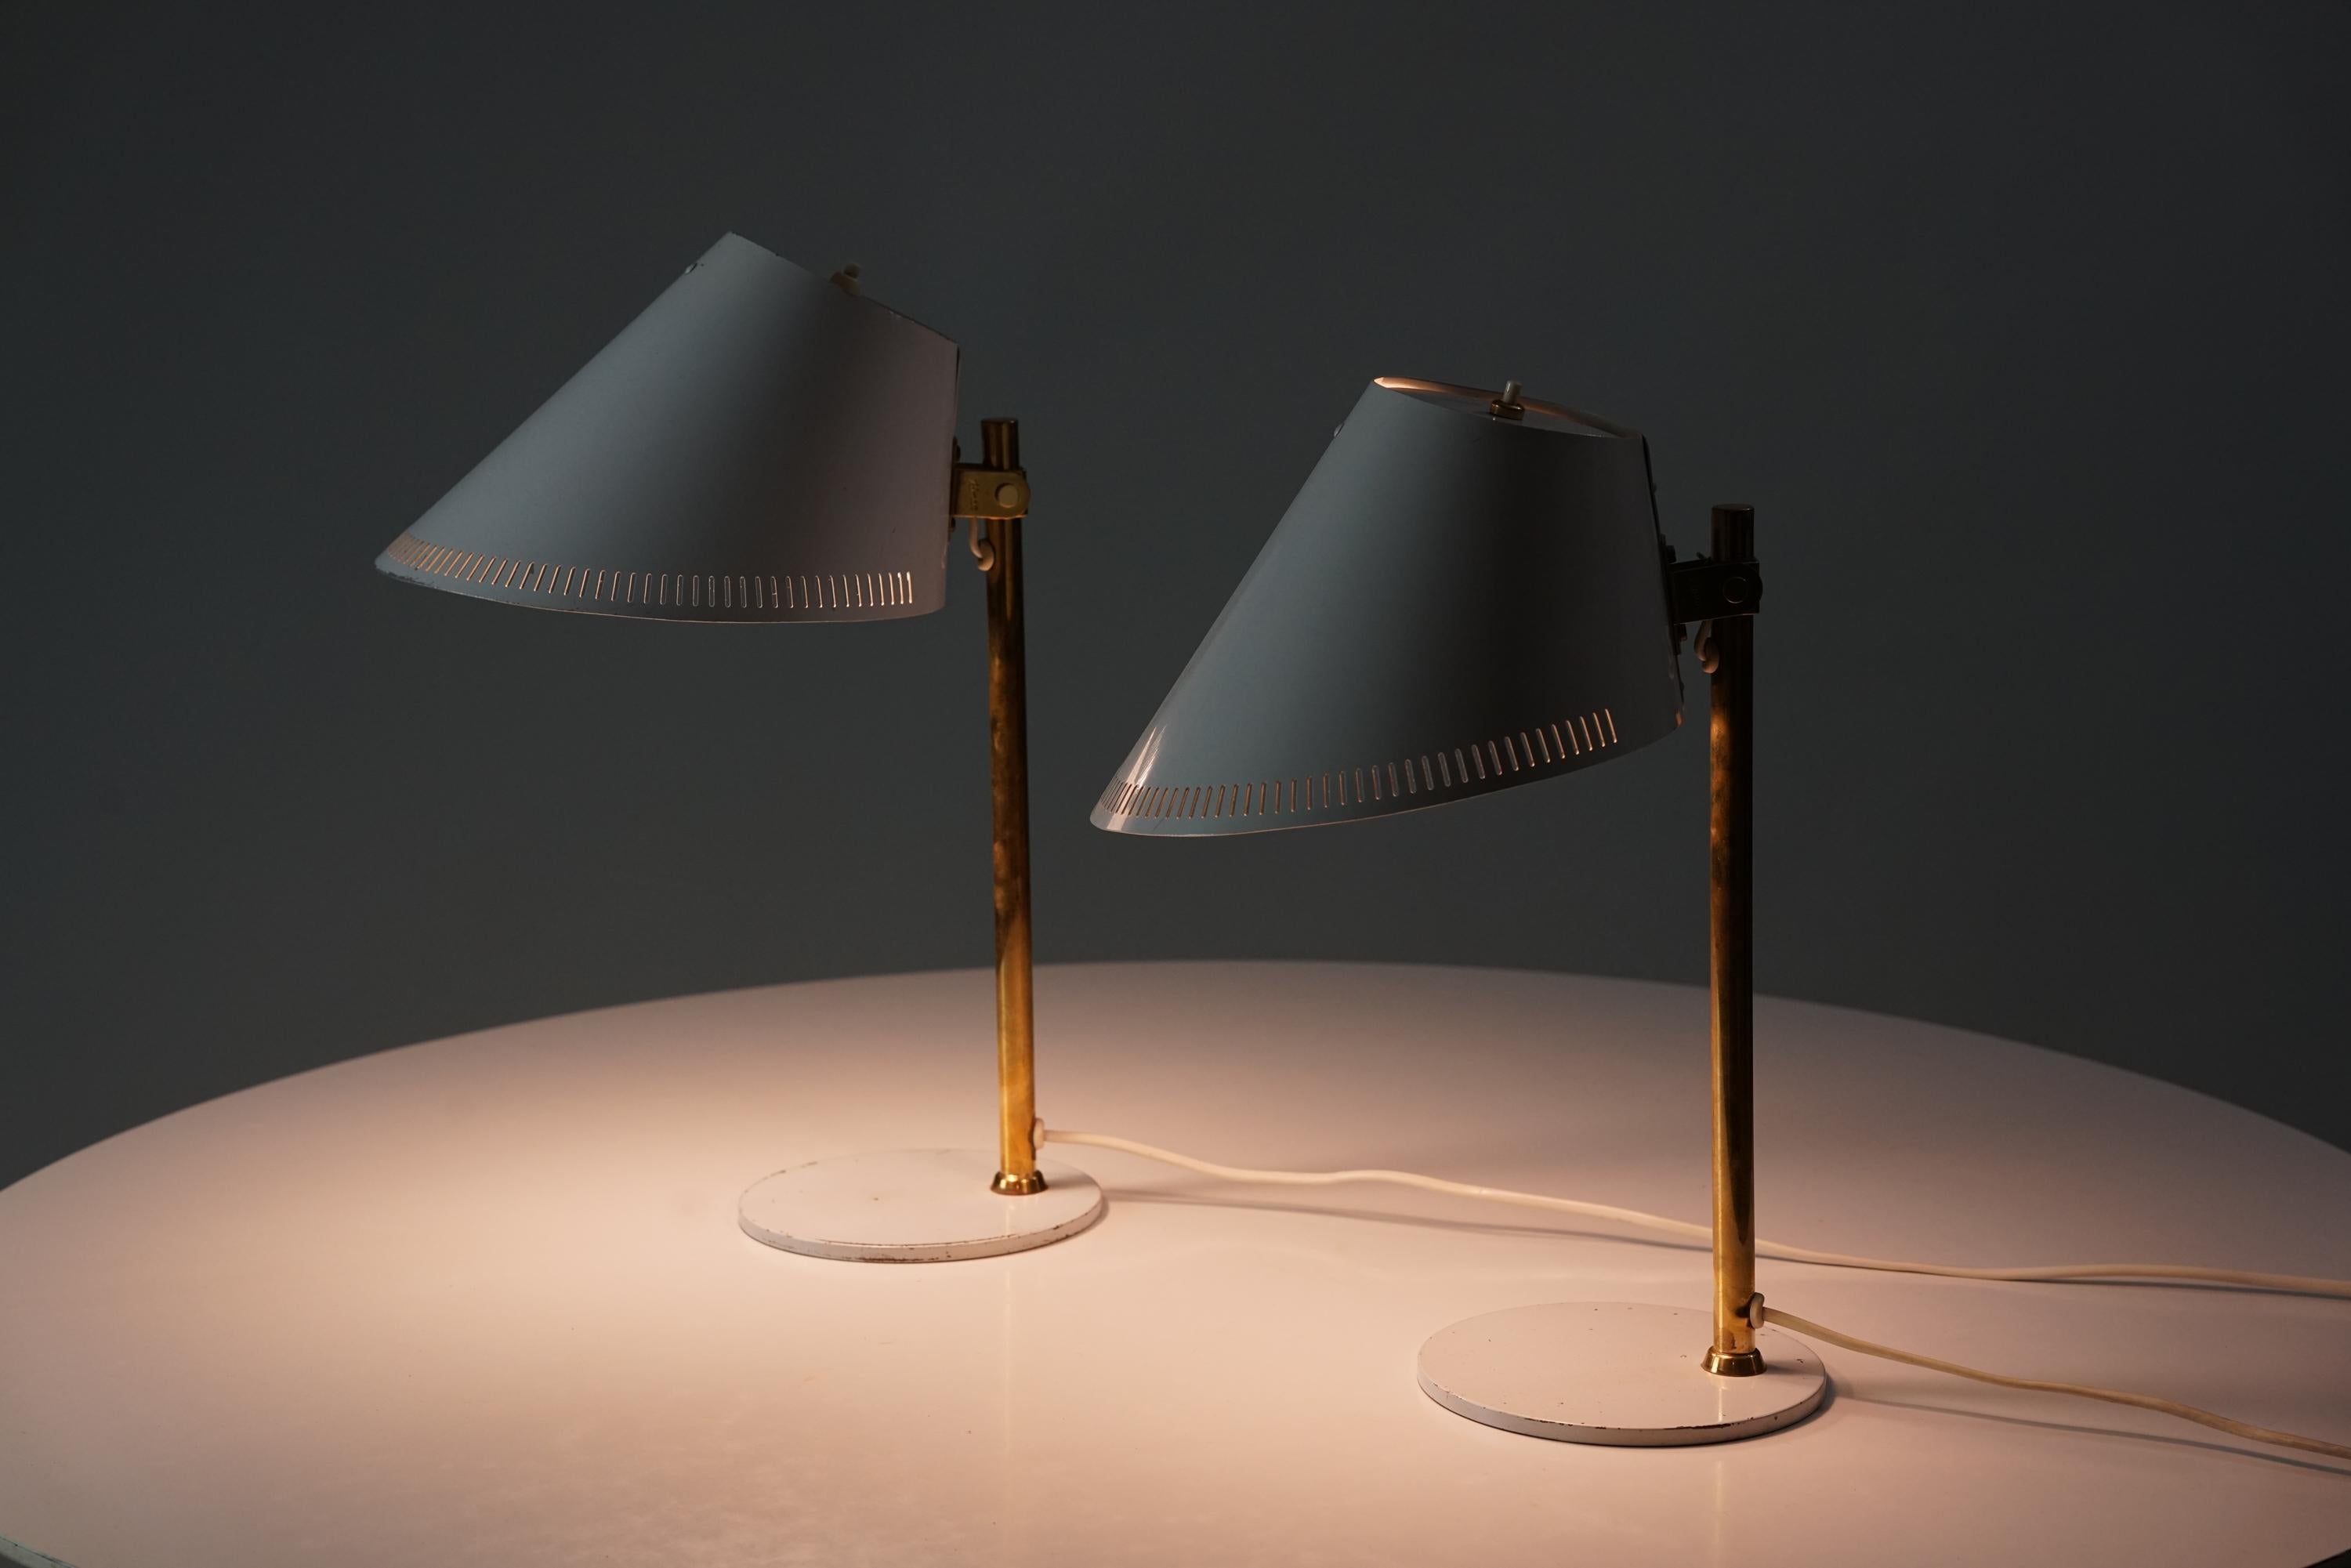 Pair of Model 9227 table lamps, design by Paavo Tynell, manufactured by Idman Oy, 1950s. Metal and brass. Good vintage condition, minor patina consistent with age and use. Iconic Paavo Tynell design. 

Paavo Tynell (1890-1973) is one of the most